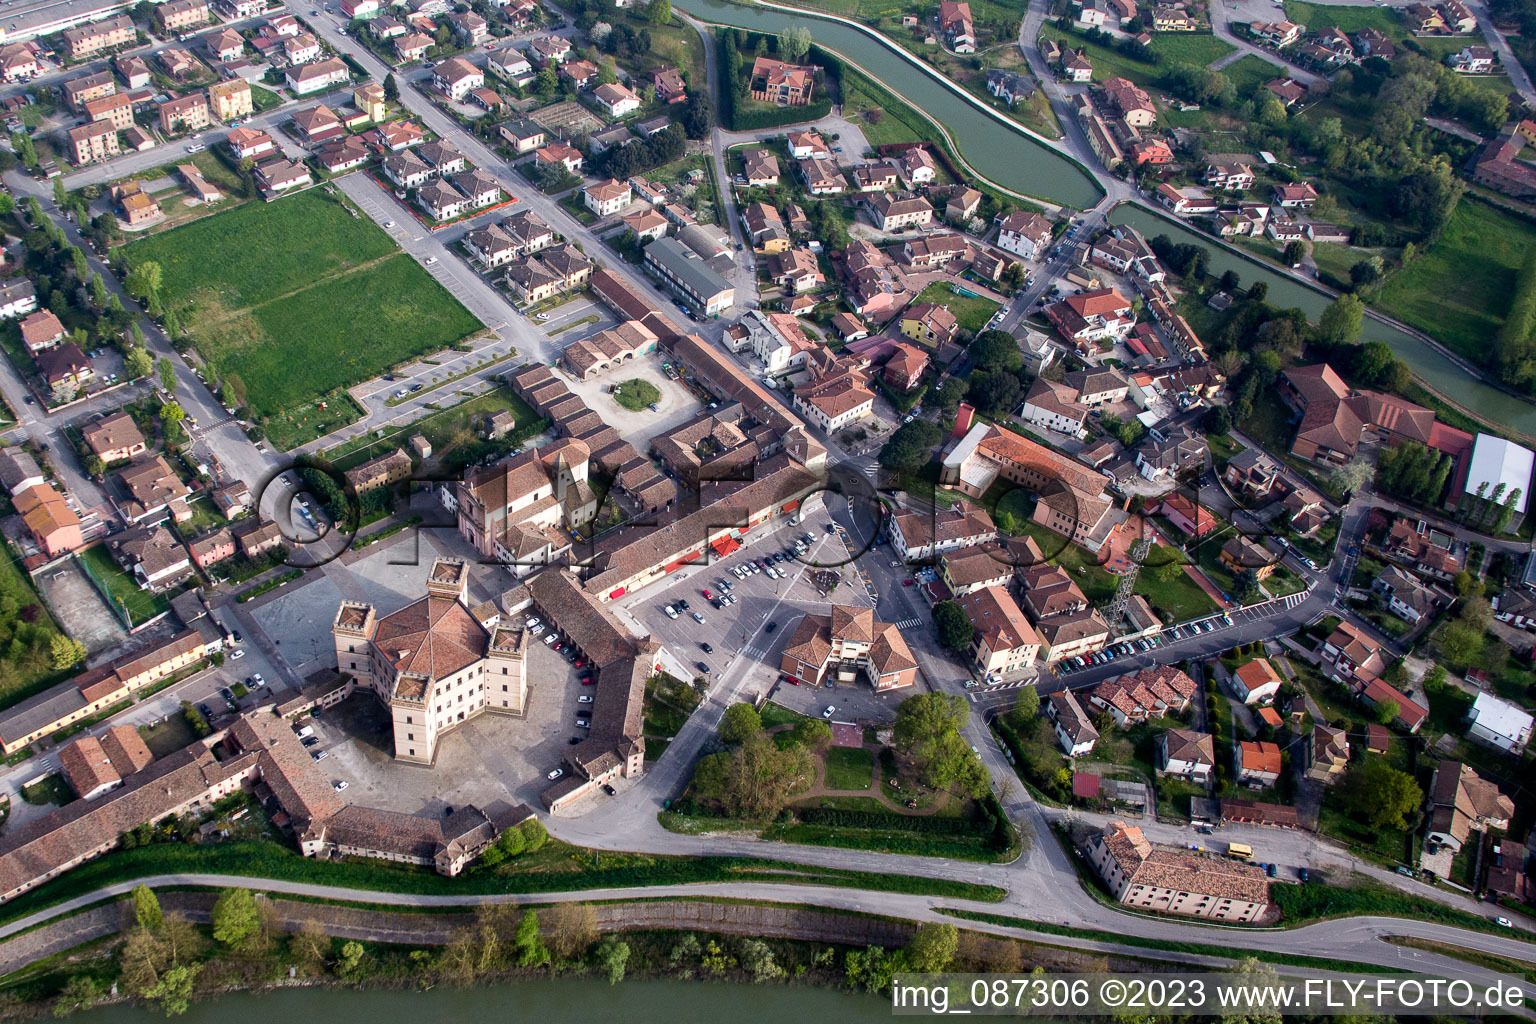 Drone image of Mesola in the state Emilia Romagna, Italy